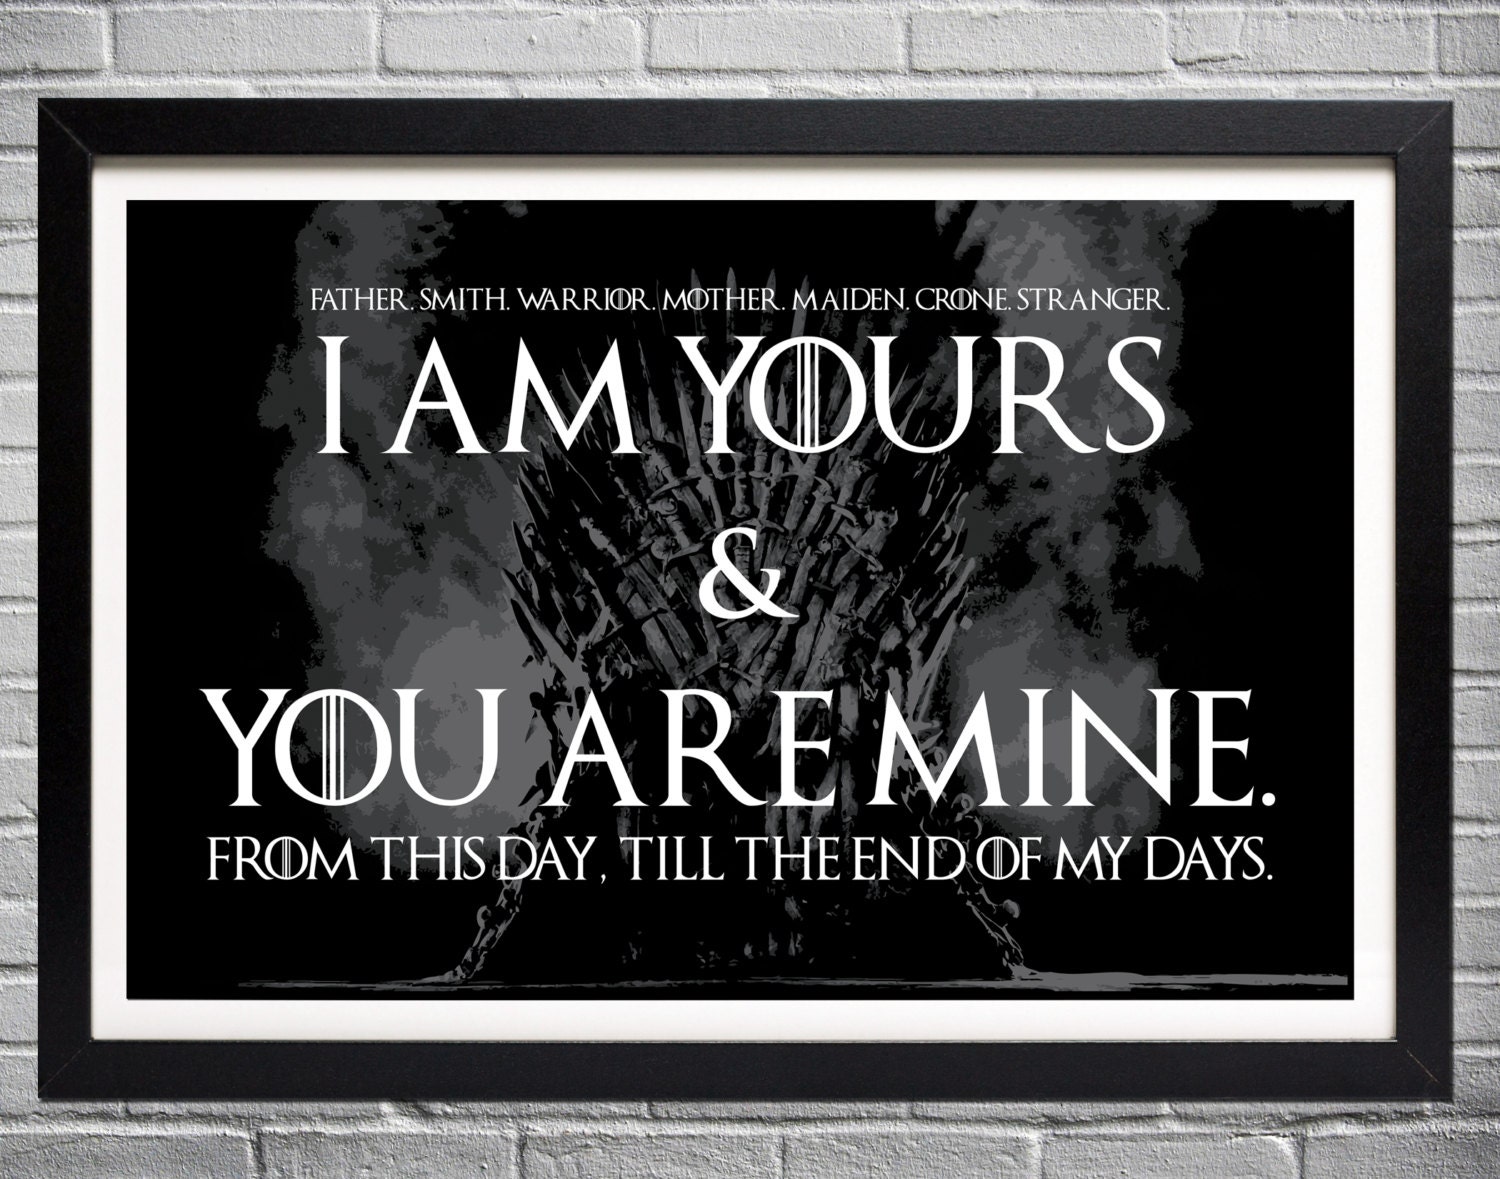 Game of Thrones Wedding Vows I am yours and you by EAlexDesigns